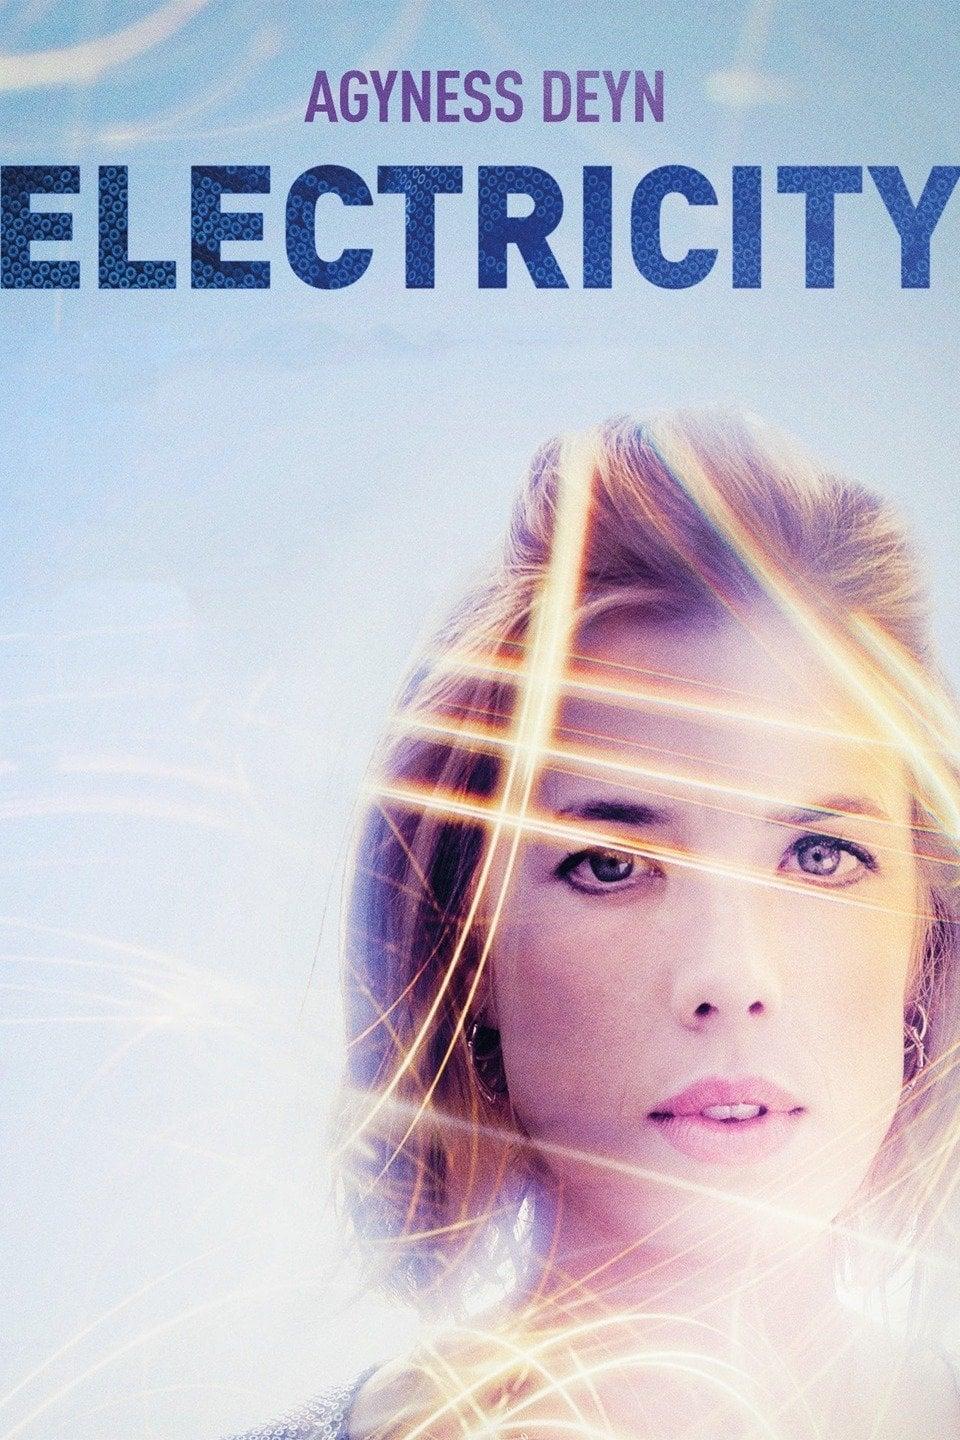 Electricity poster